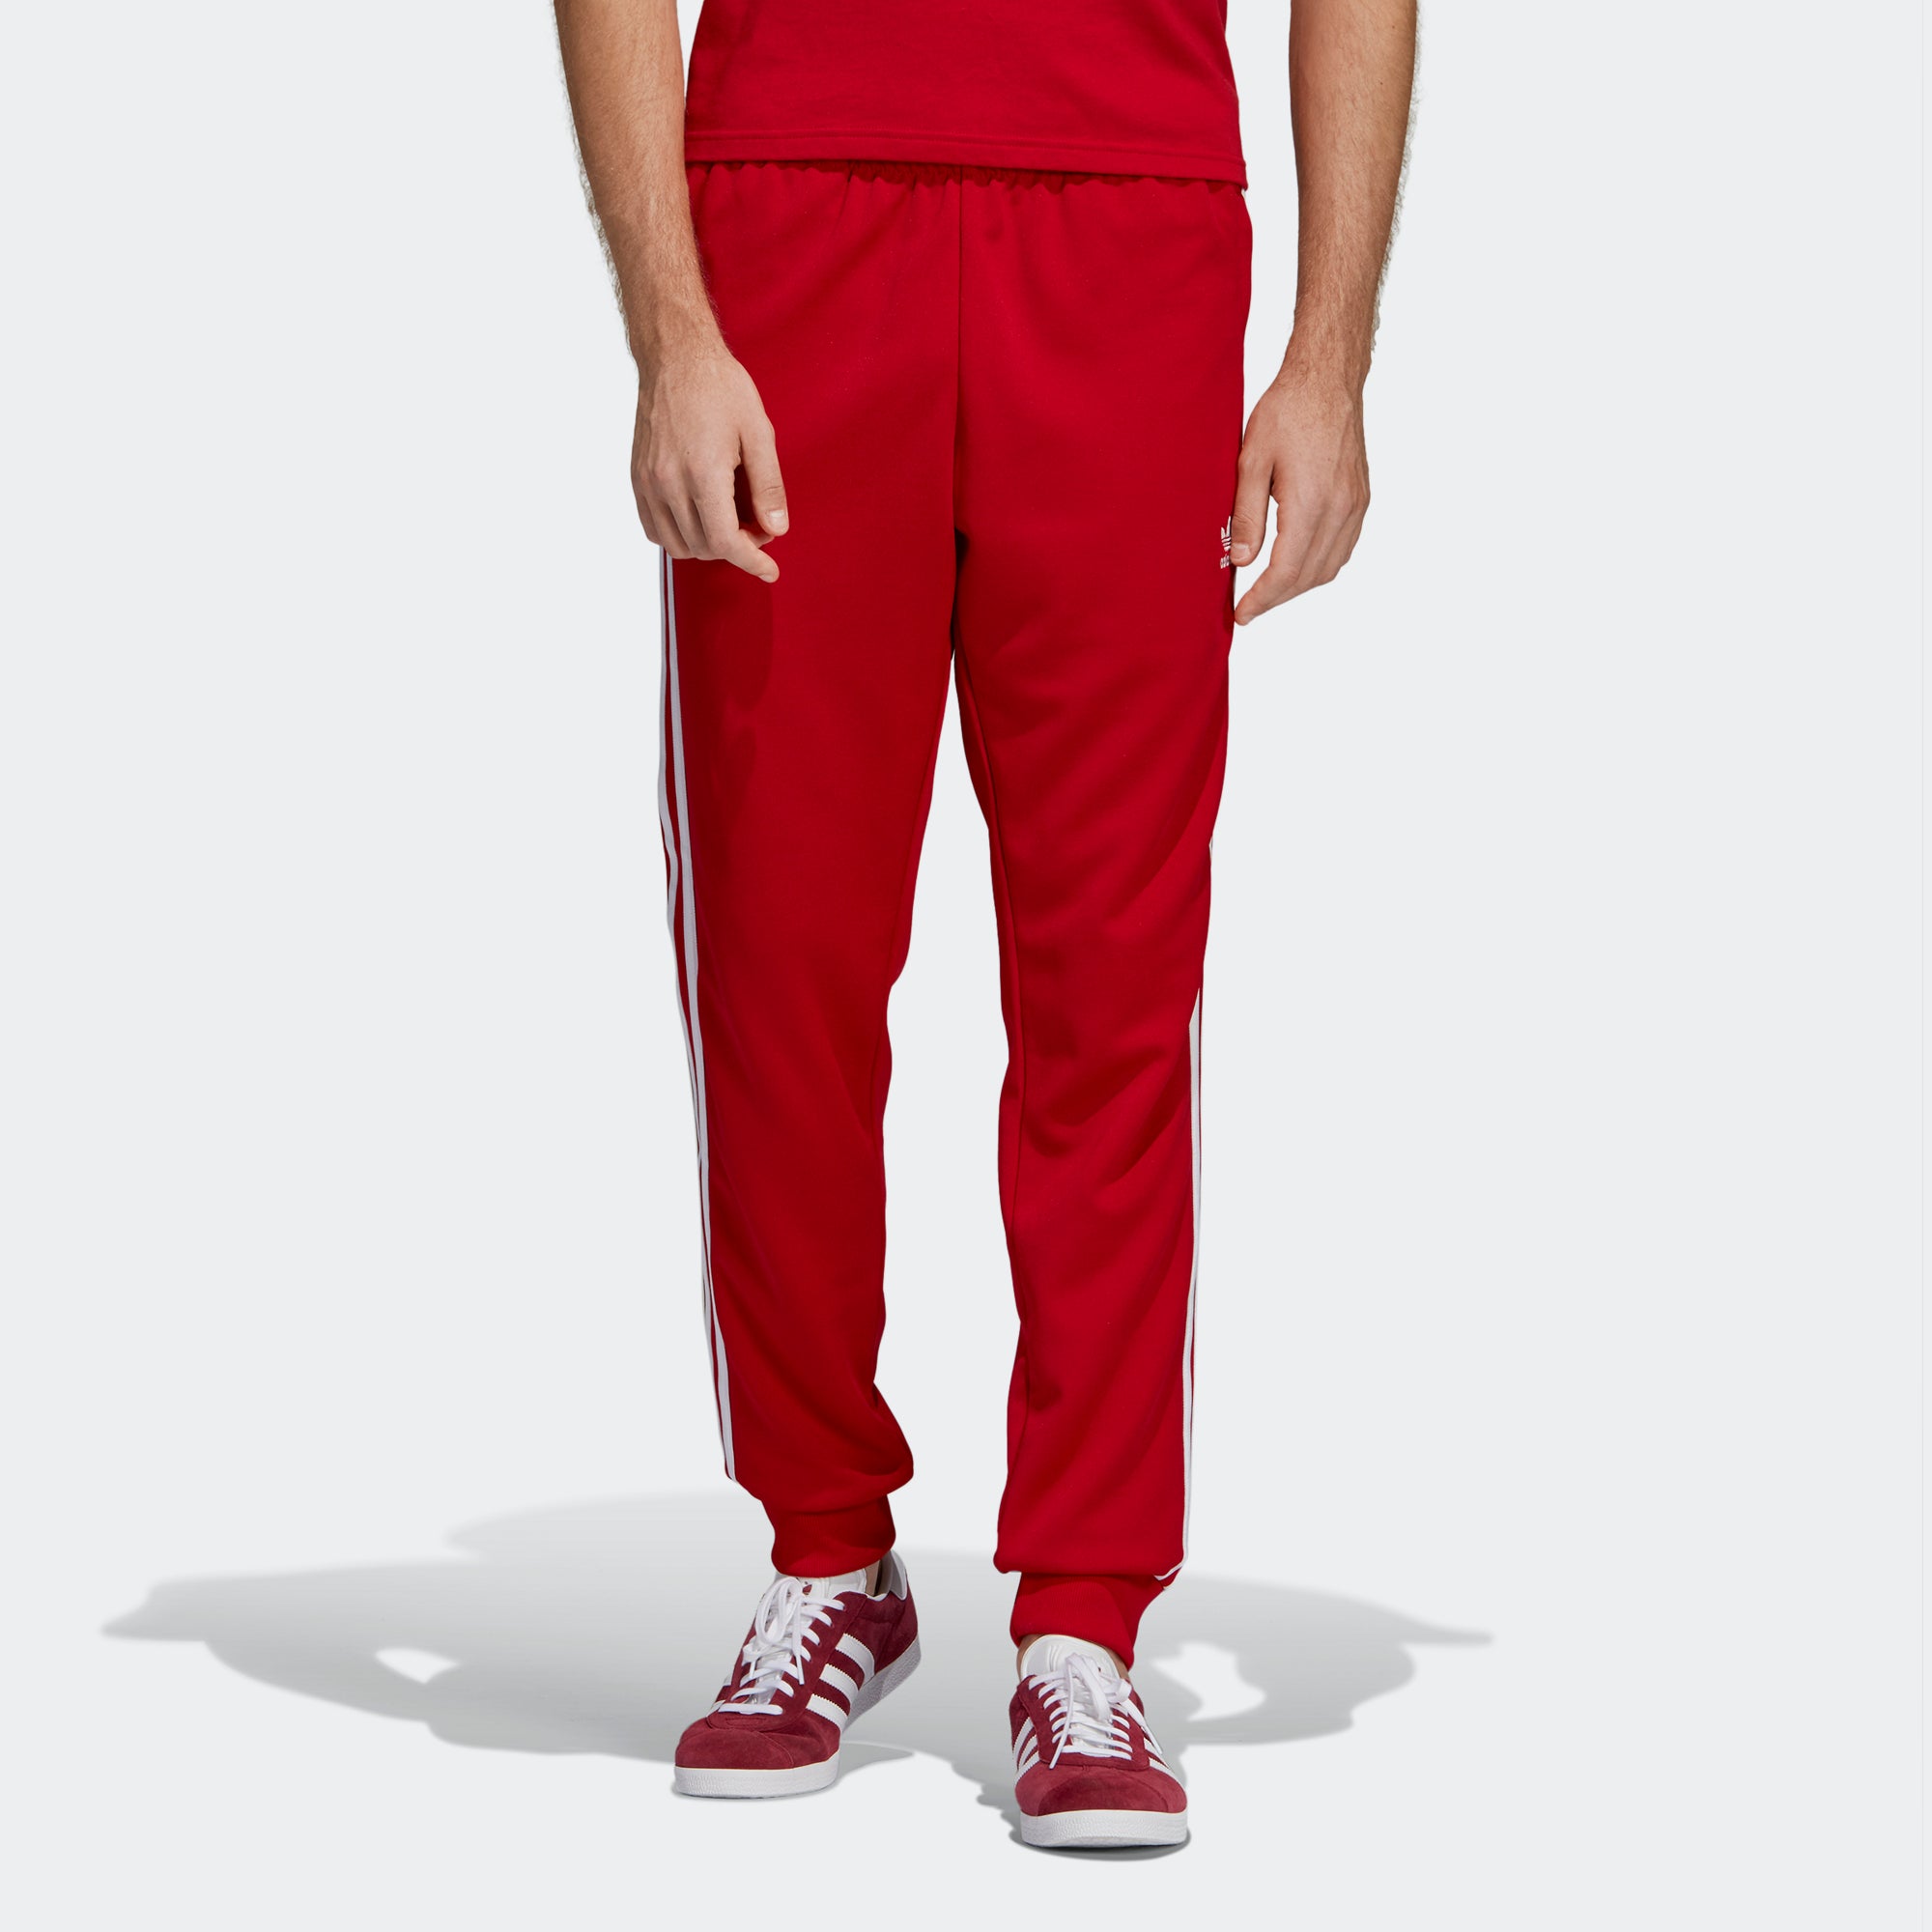 adidas sst track pants womens red